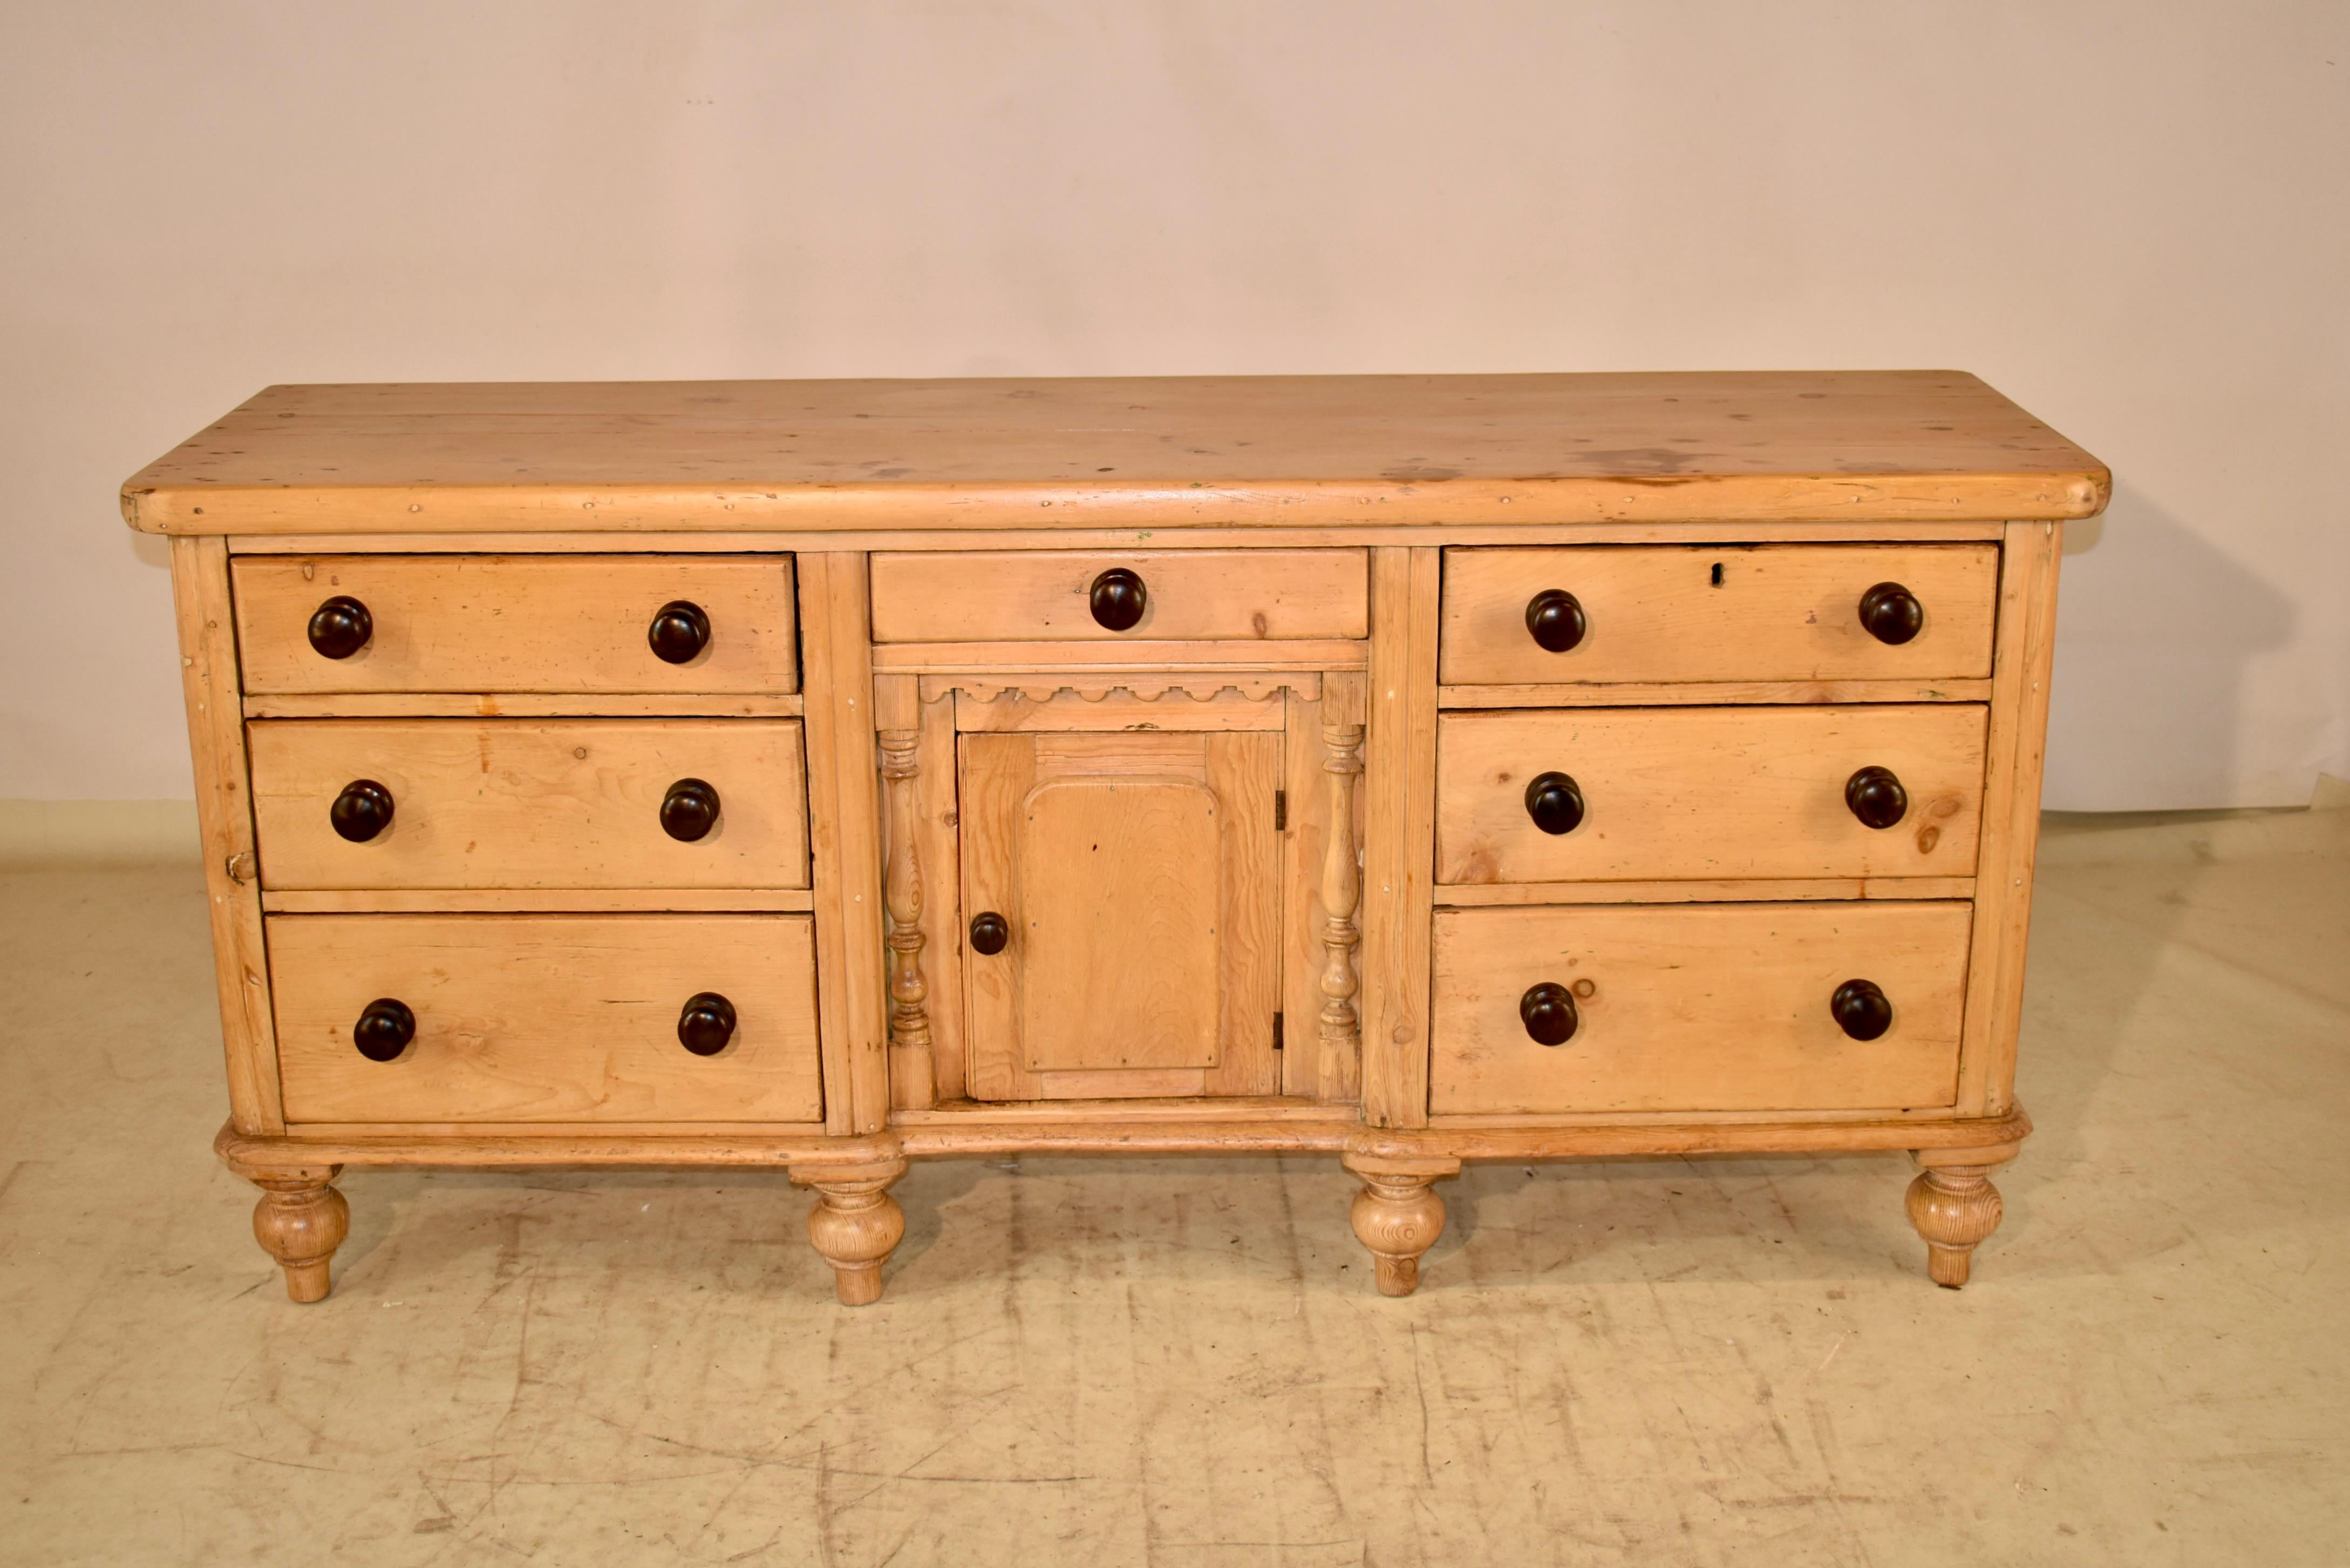 19th century pine dresser base from England.  This fabulous piece has a thick two plank top, which follows down to a central single drawer over a single door, which opens to reveal shelving.  The central drawer and door are flanked by two sets of